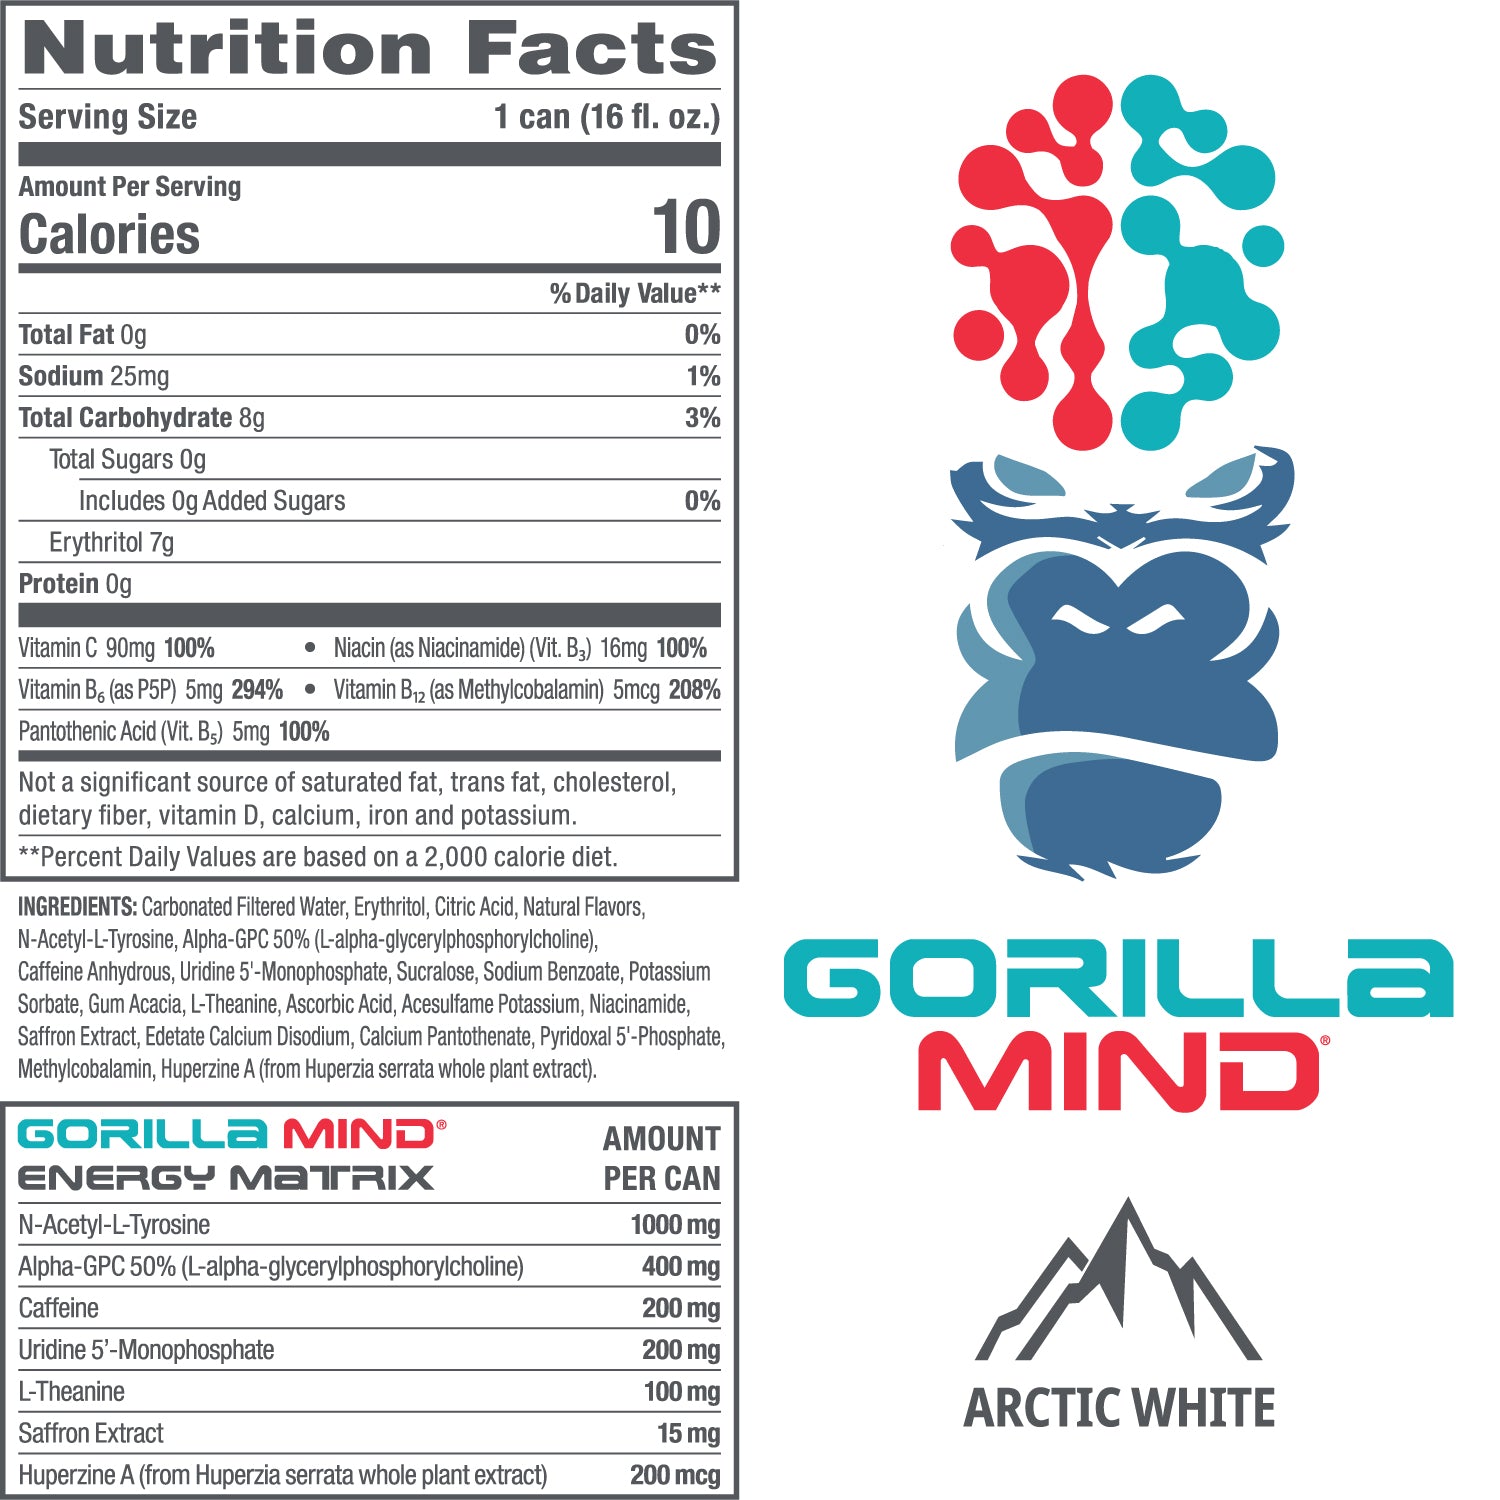 Arctic White Nutrition Facts